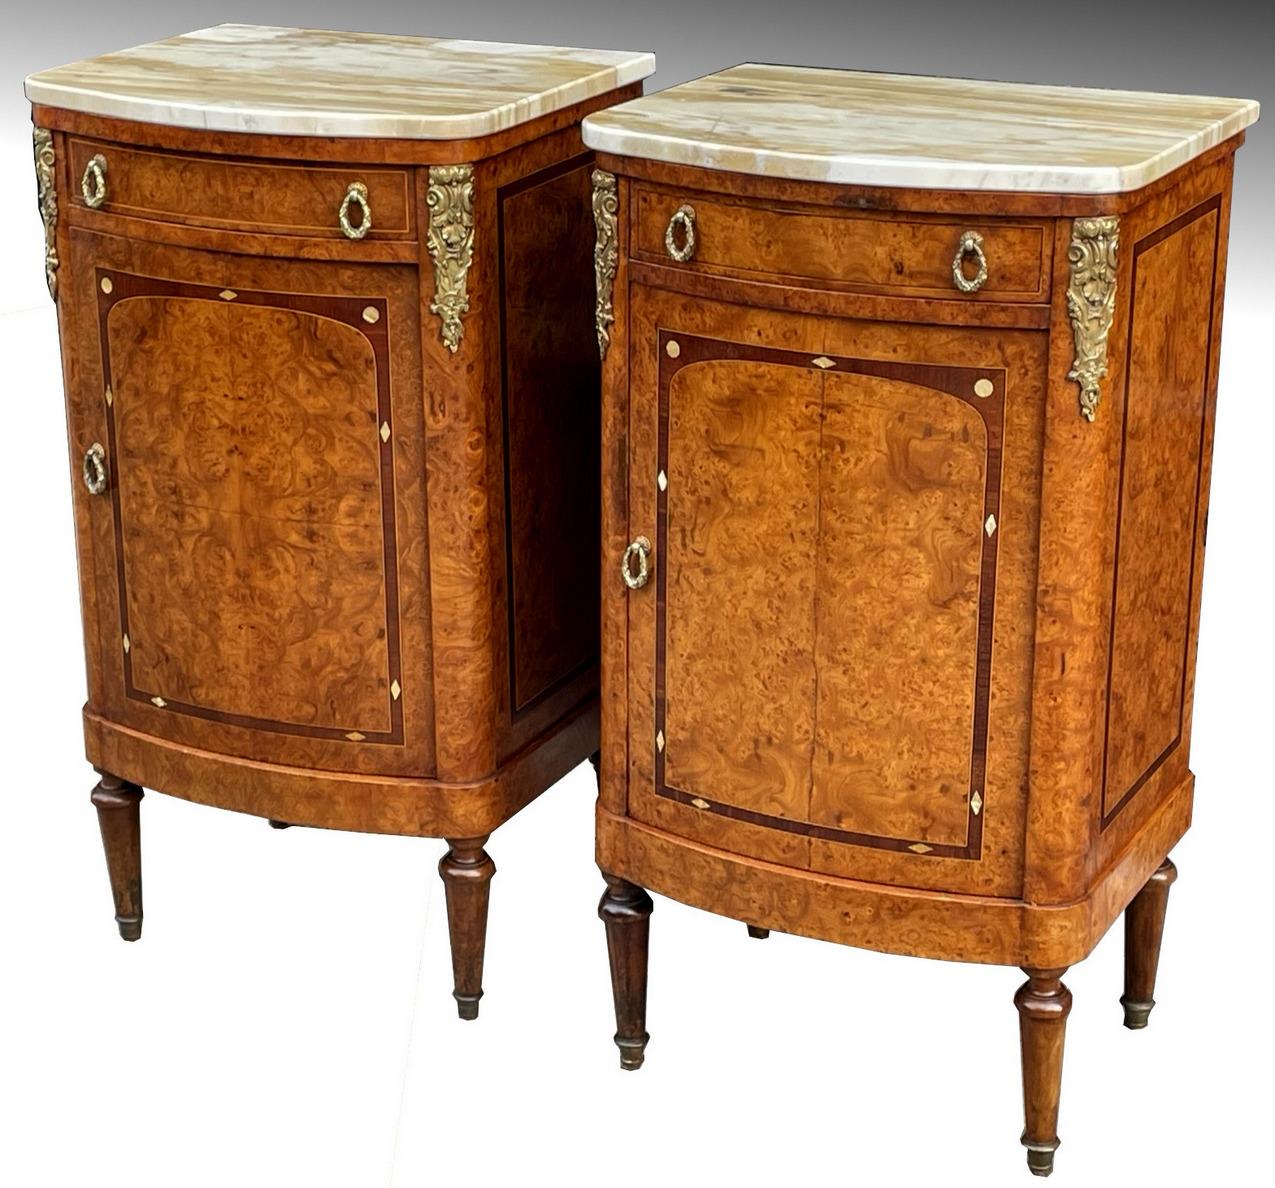 Brass Antique French Ormolu Marble Top Santos Wood Bedside Cabinets Locker Nightstands For Sale